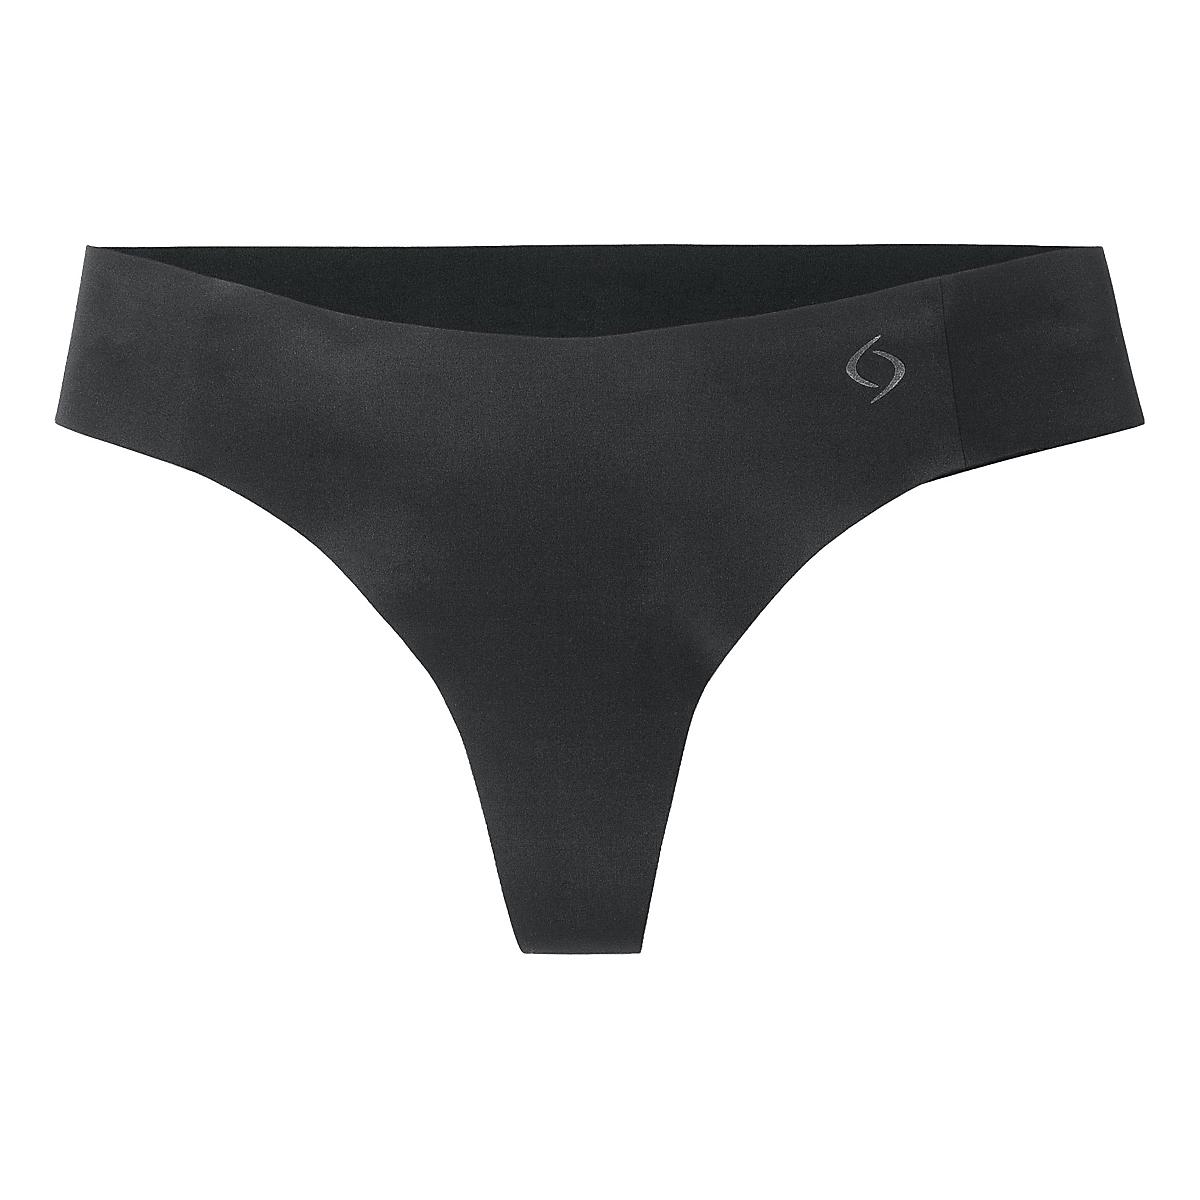 Womens Moving Comfort Out-of-Sight Thong Underwear Bottoms at Road ...